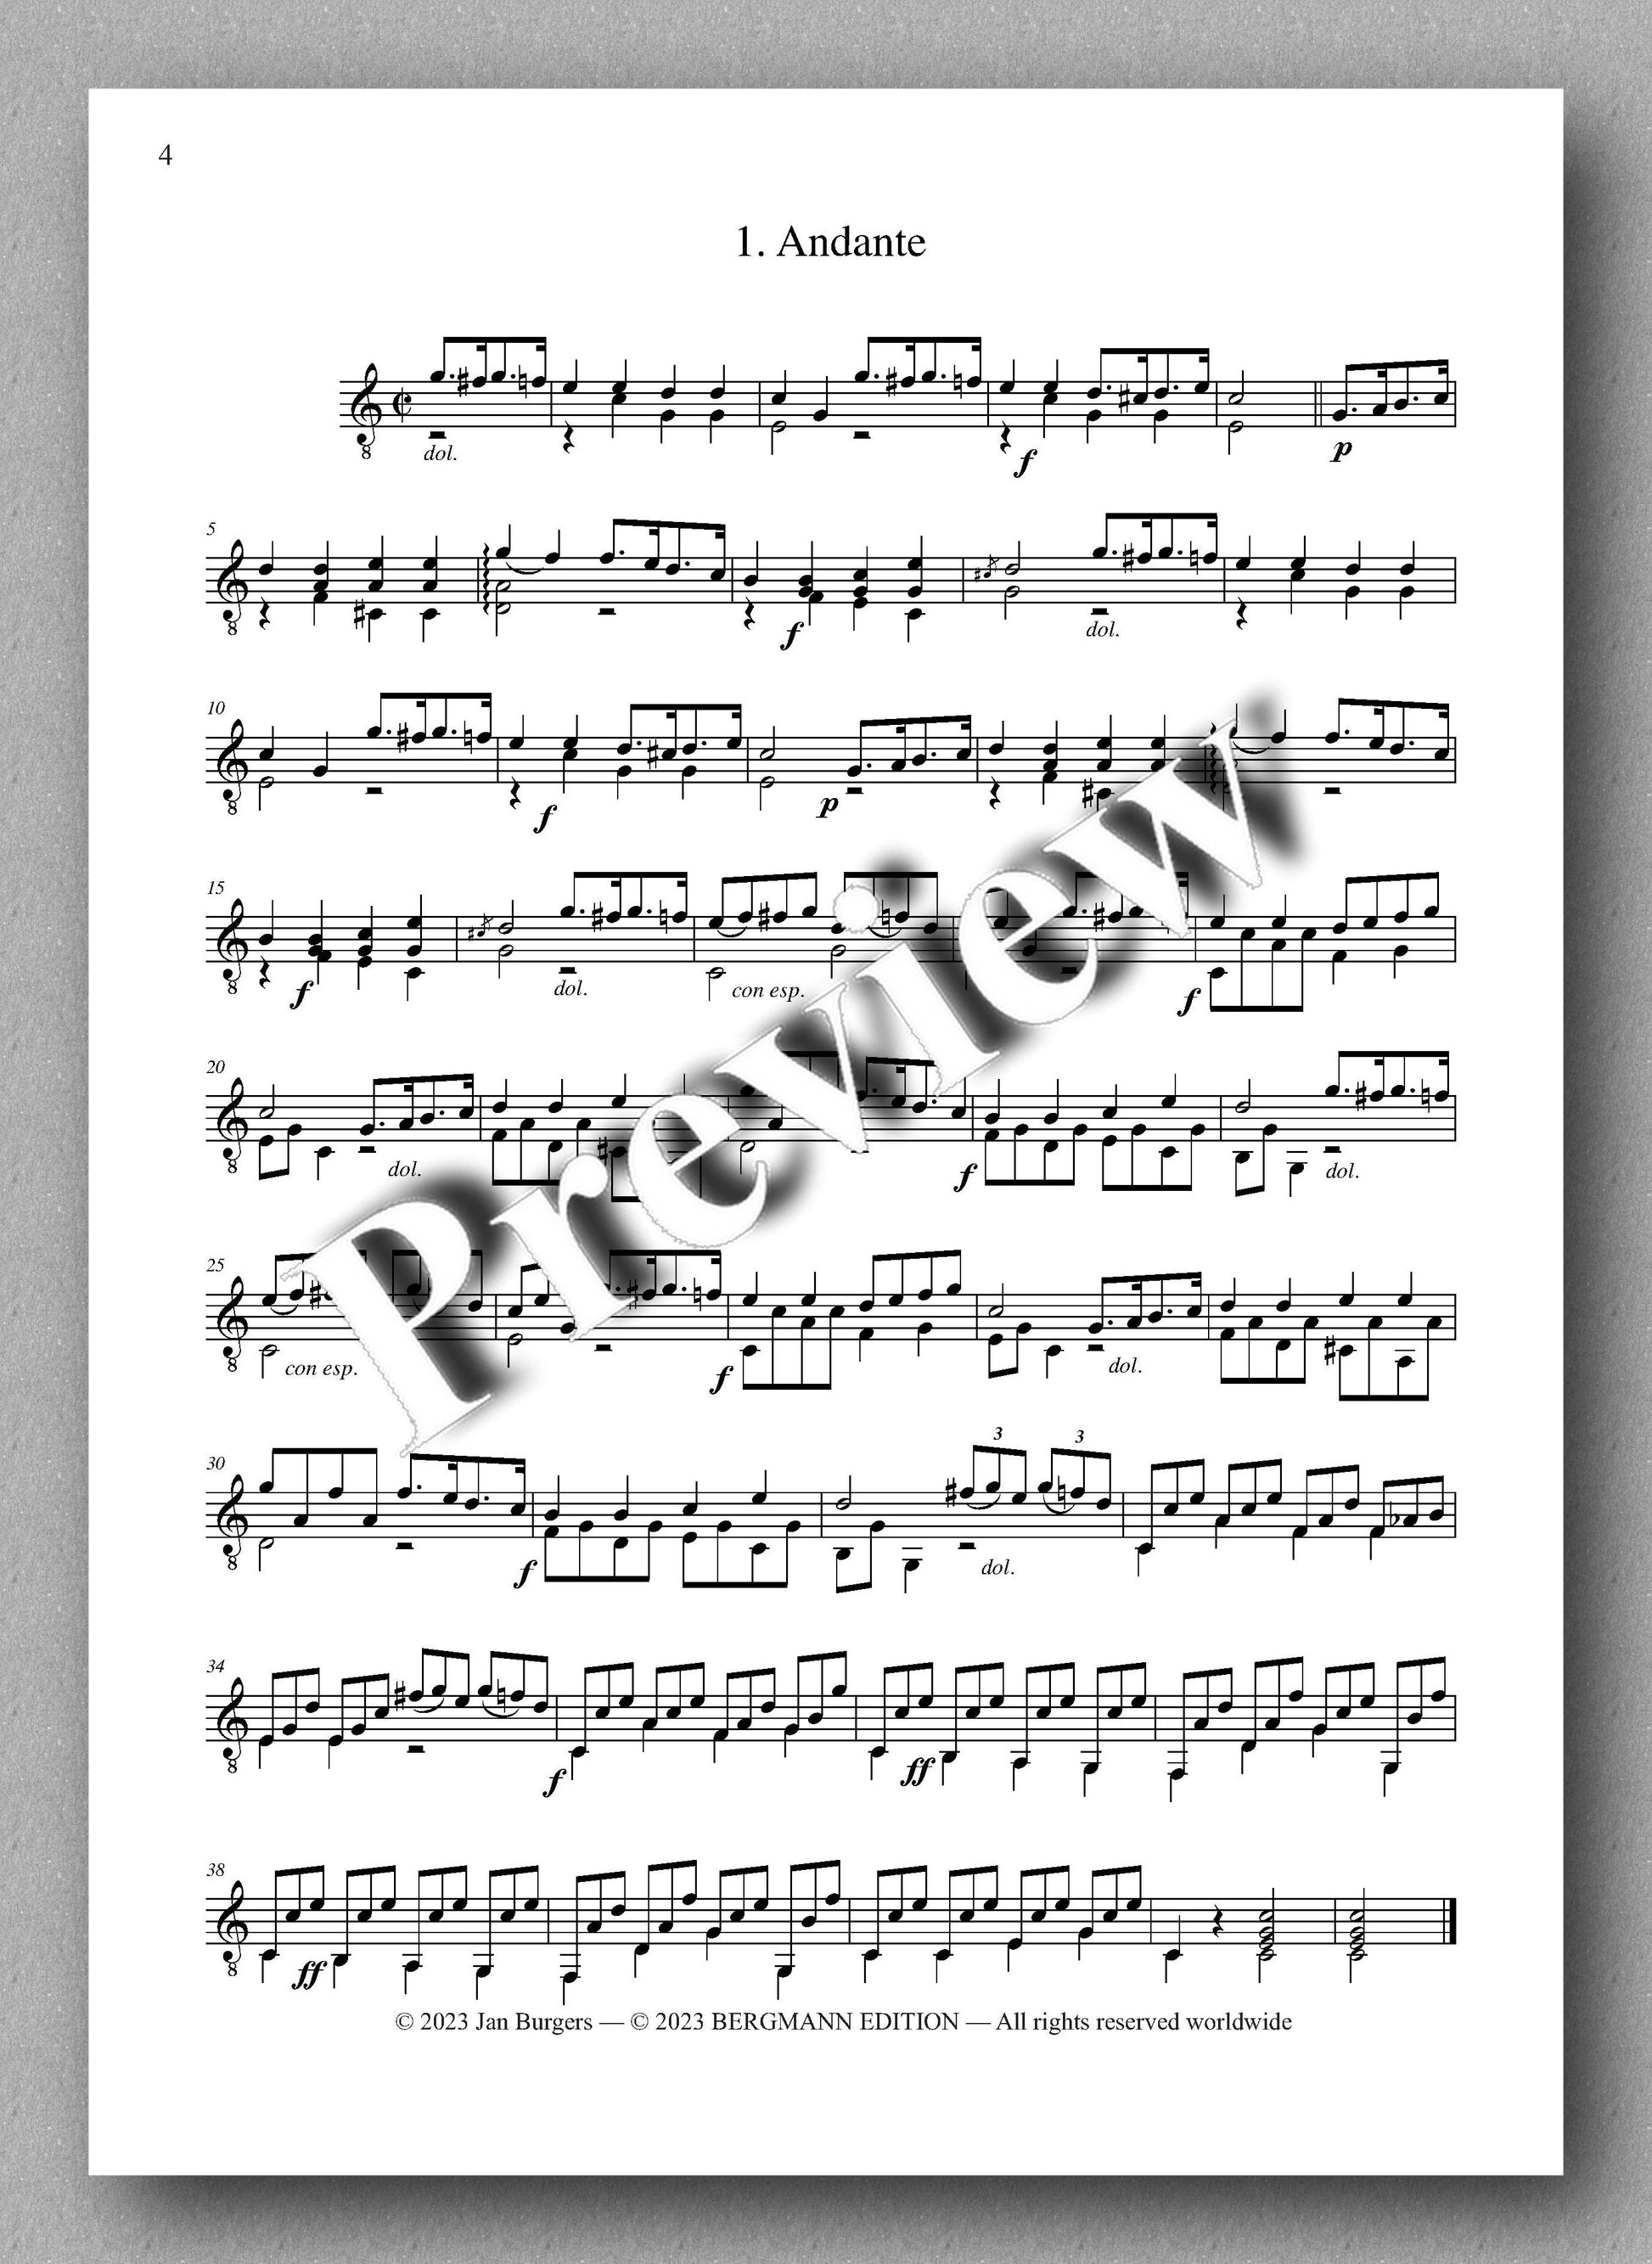 Molino, Collected Works for Guitar Solo, Vol. 14 - Preview of the music score 1